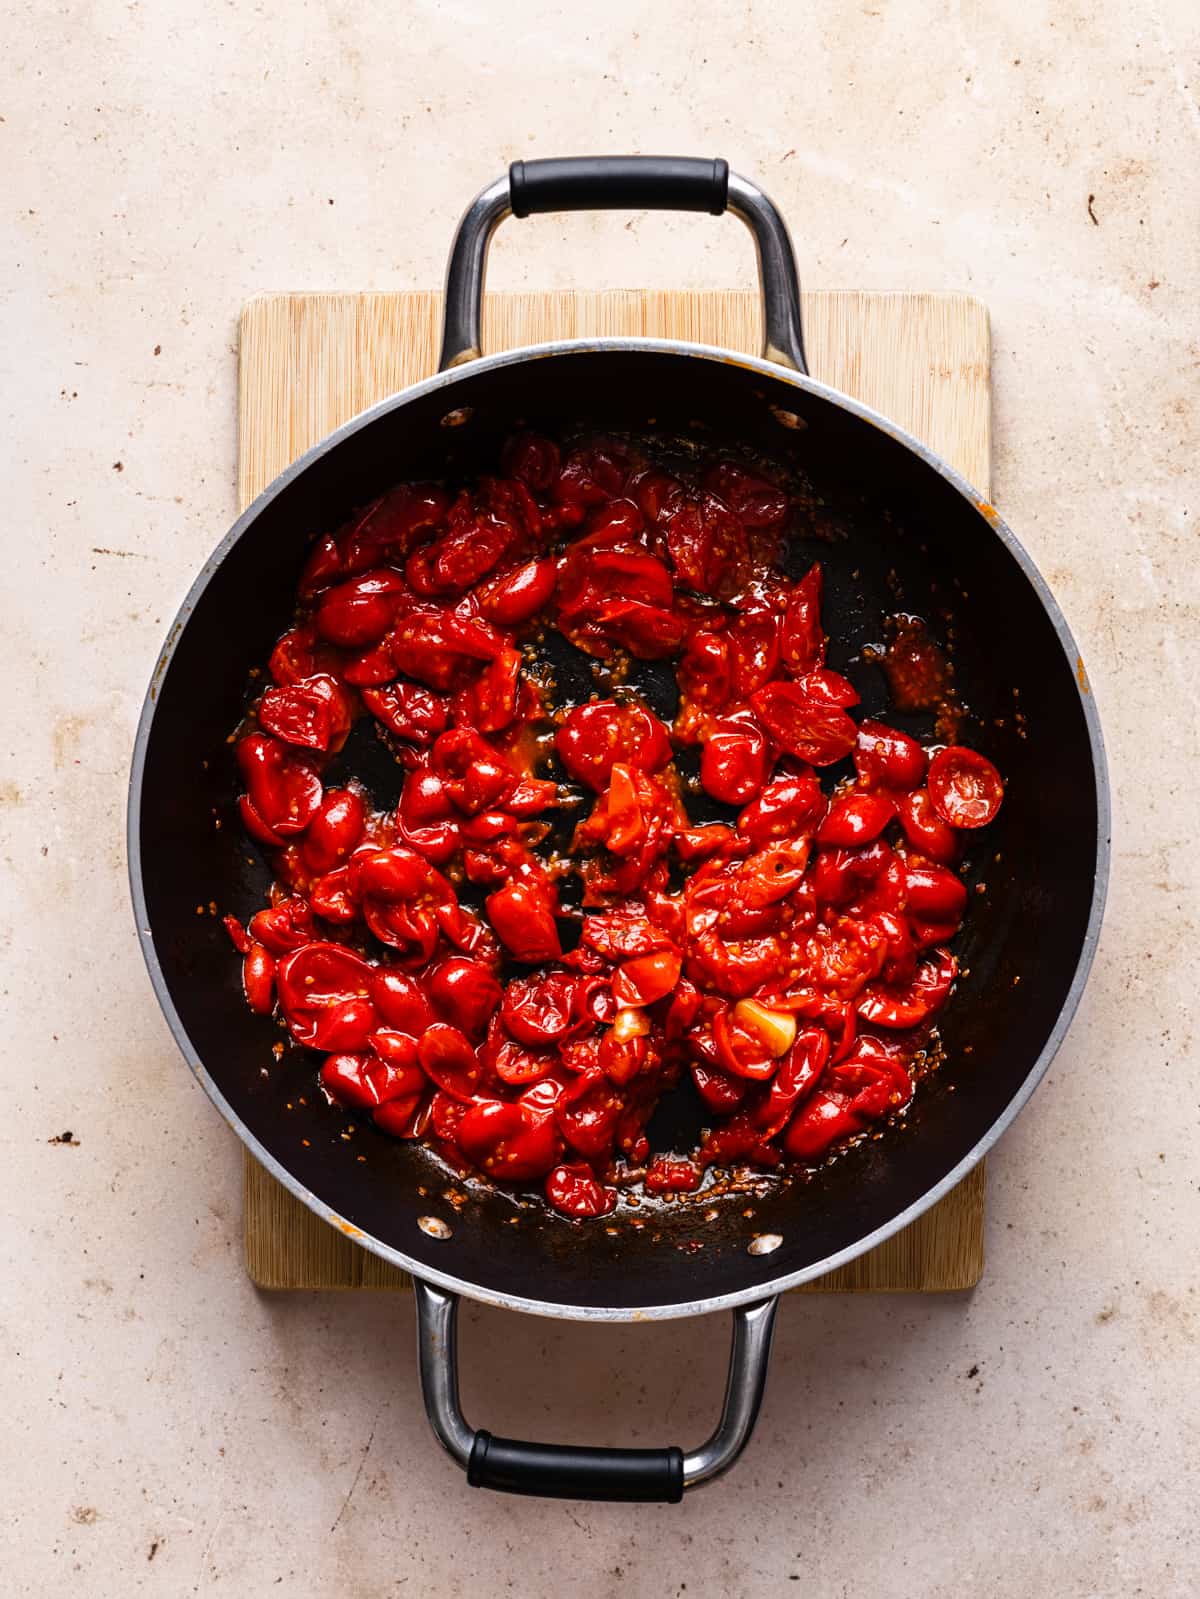 Overhead shot of a frying pan with cooked and squashed tomatoes.